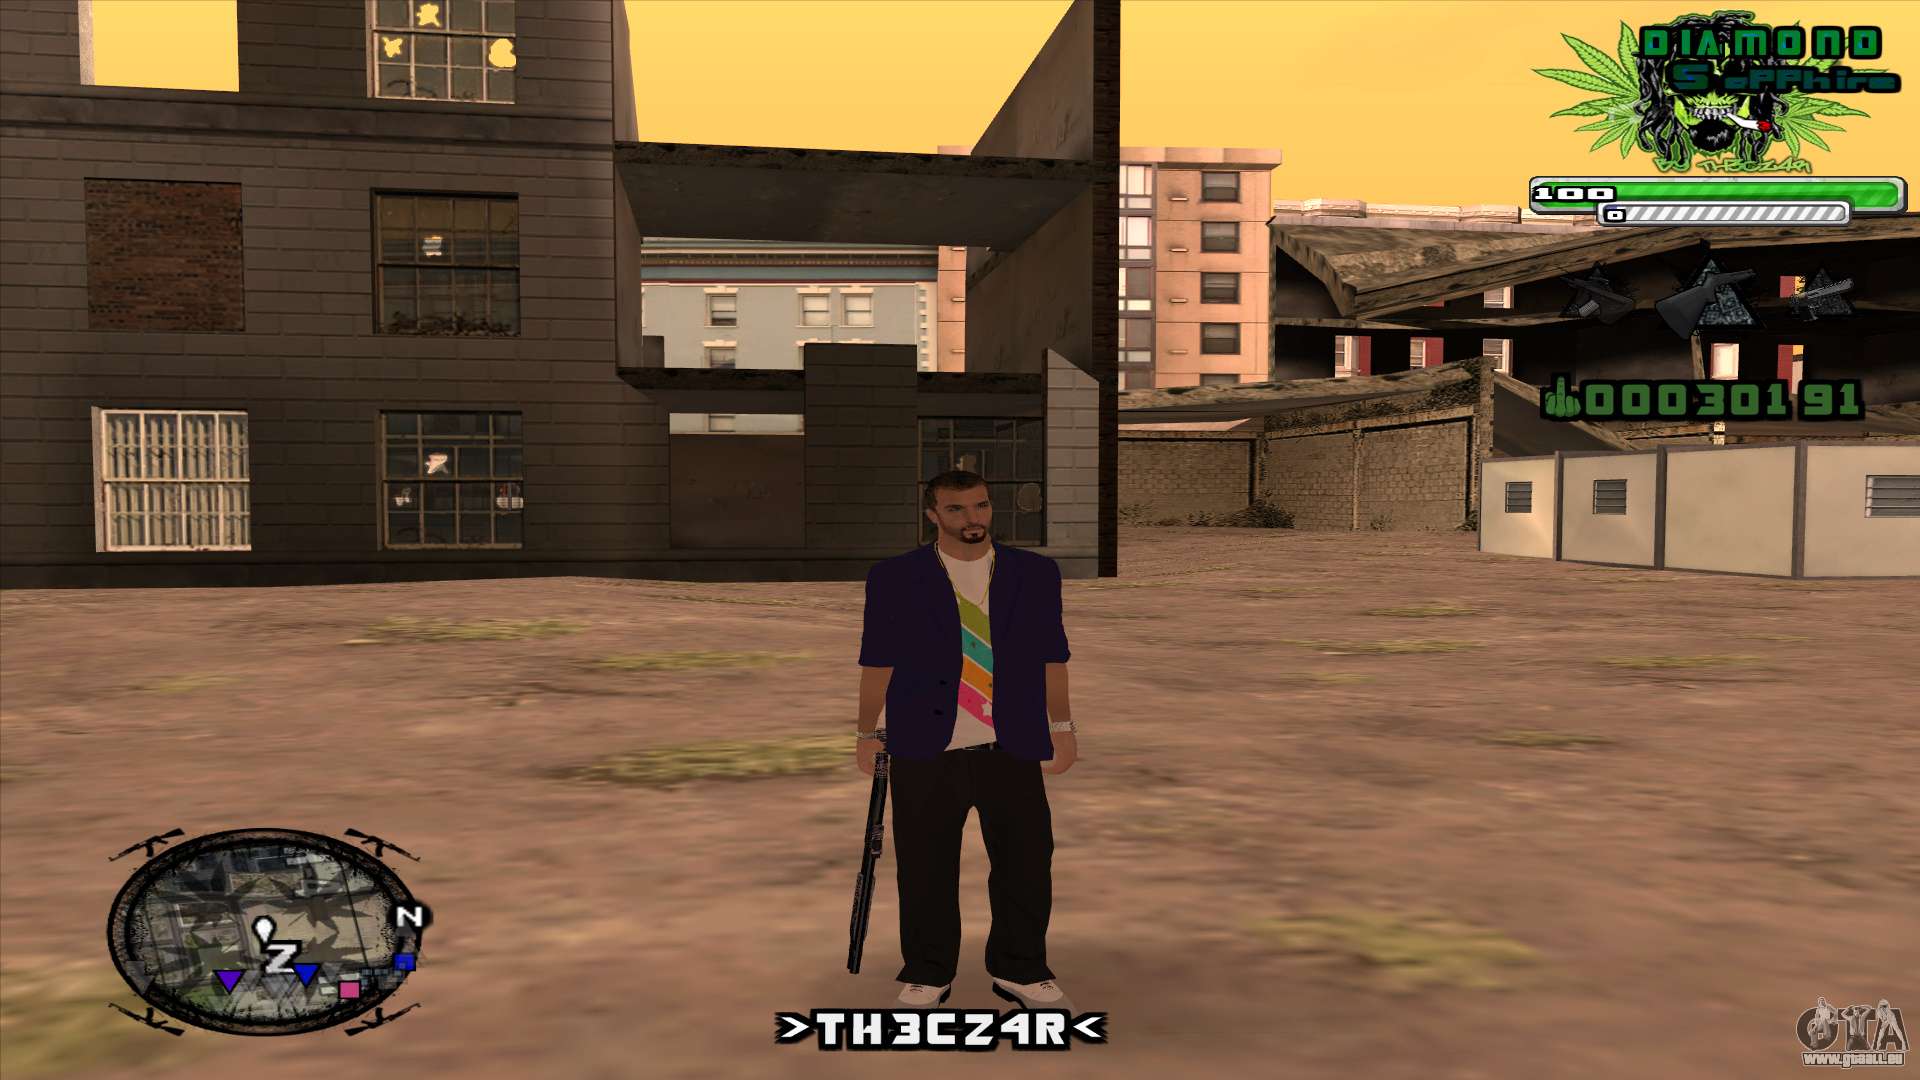 Gta San Andreas Game Download Free For PC Full Version